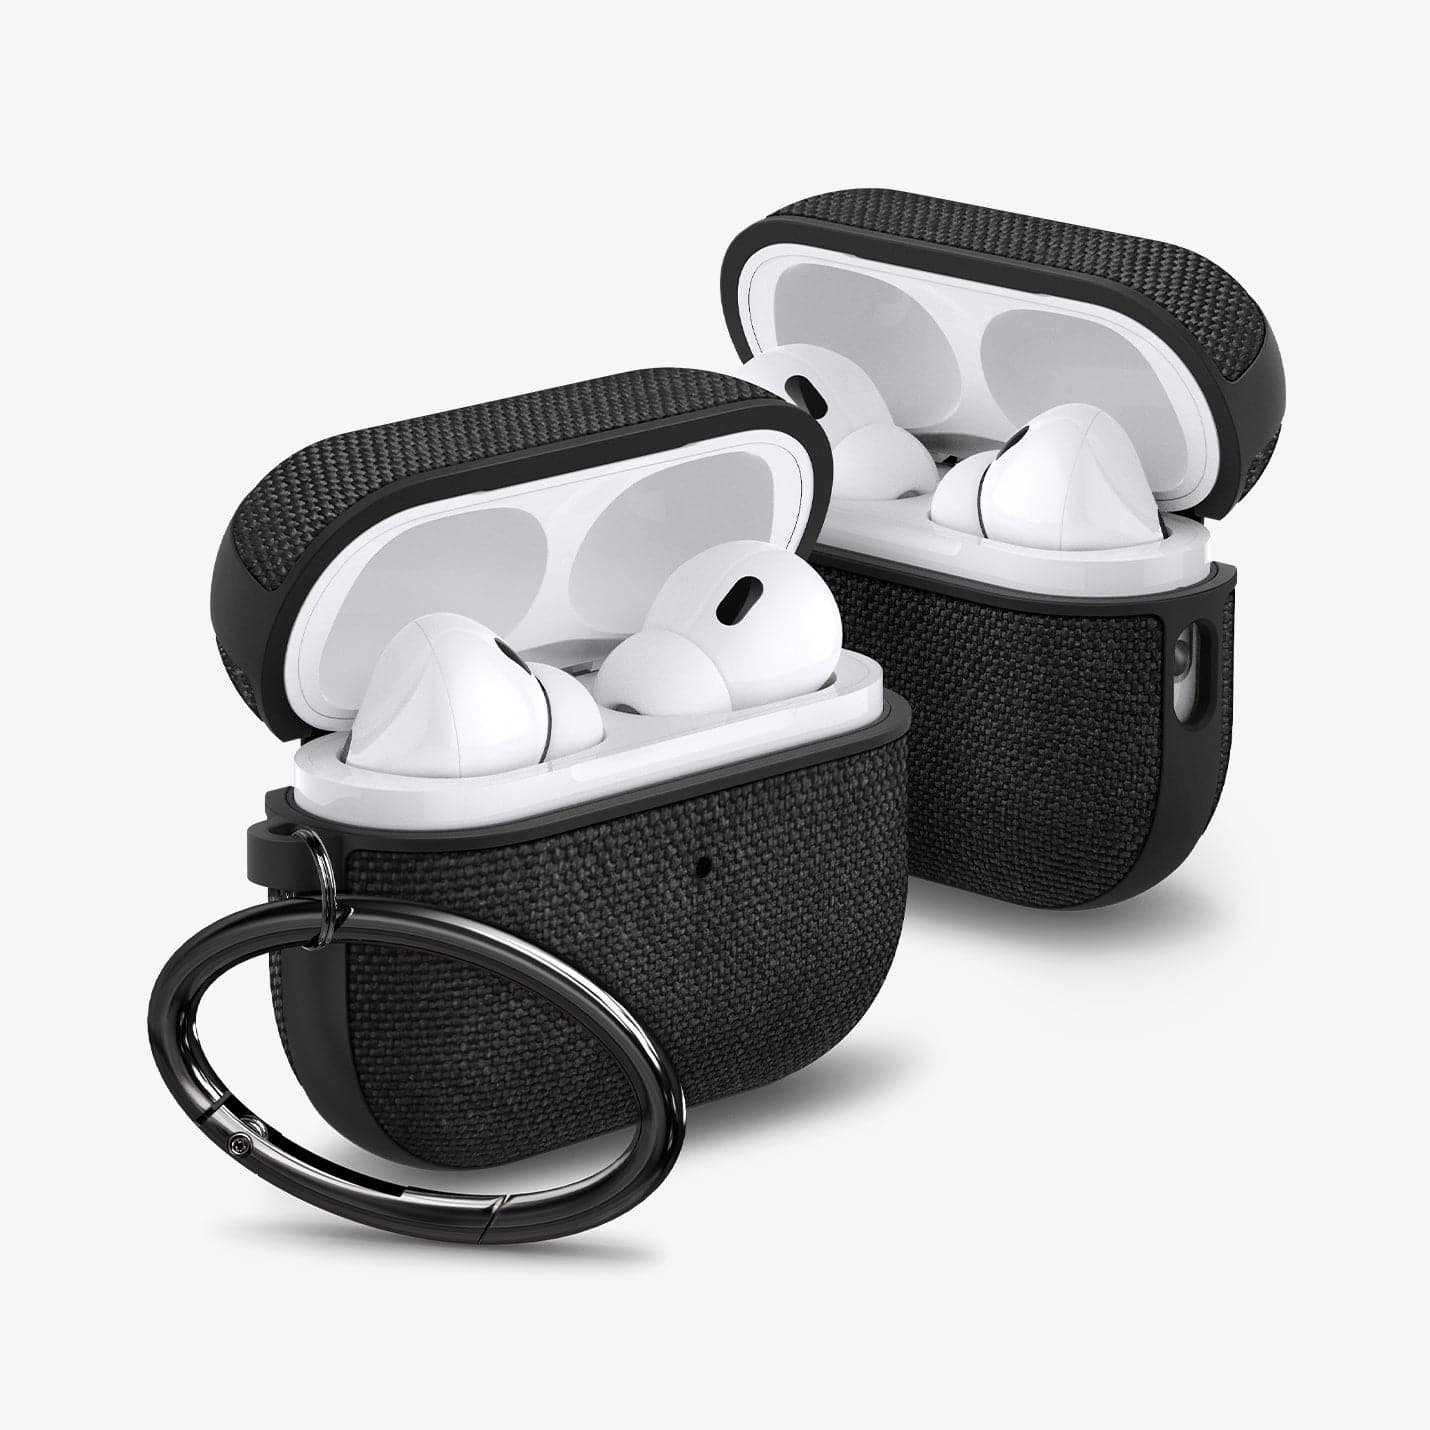 ACS05483 - Apple AirPods Pro 2 Case Urban Fit in black showing the front, sides, carabiner and top open with AirPods inside